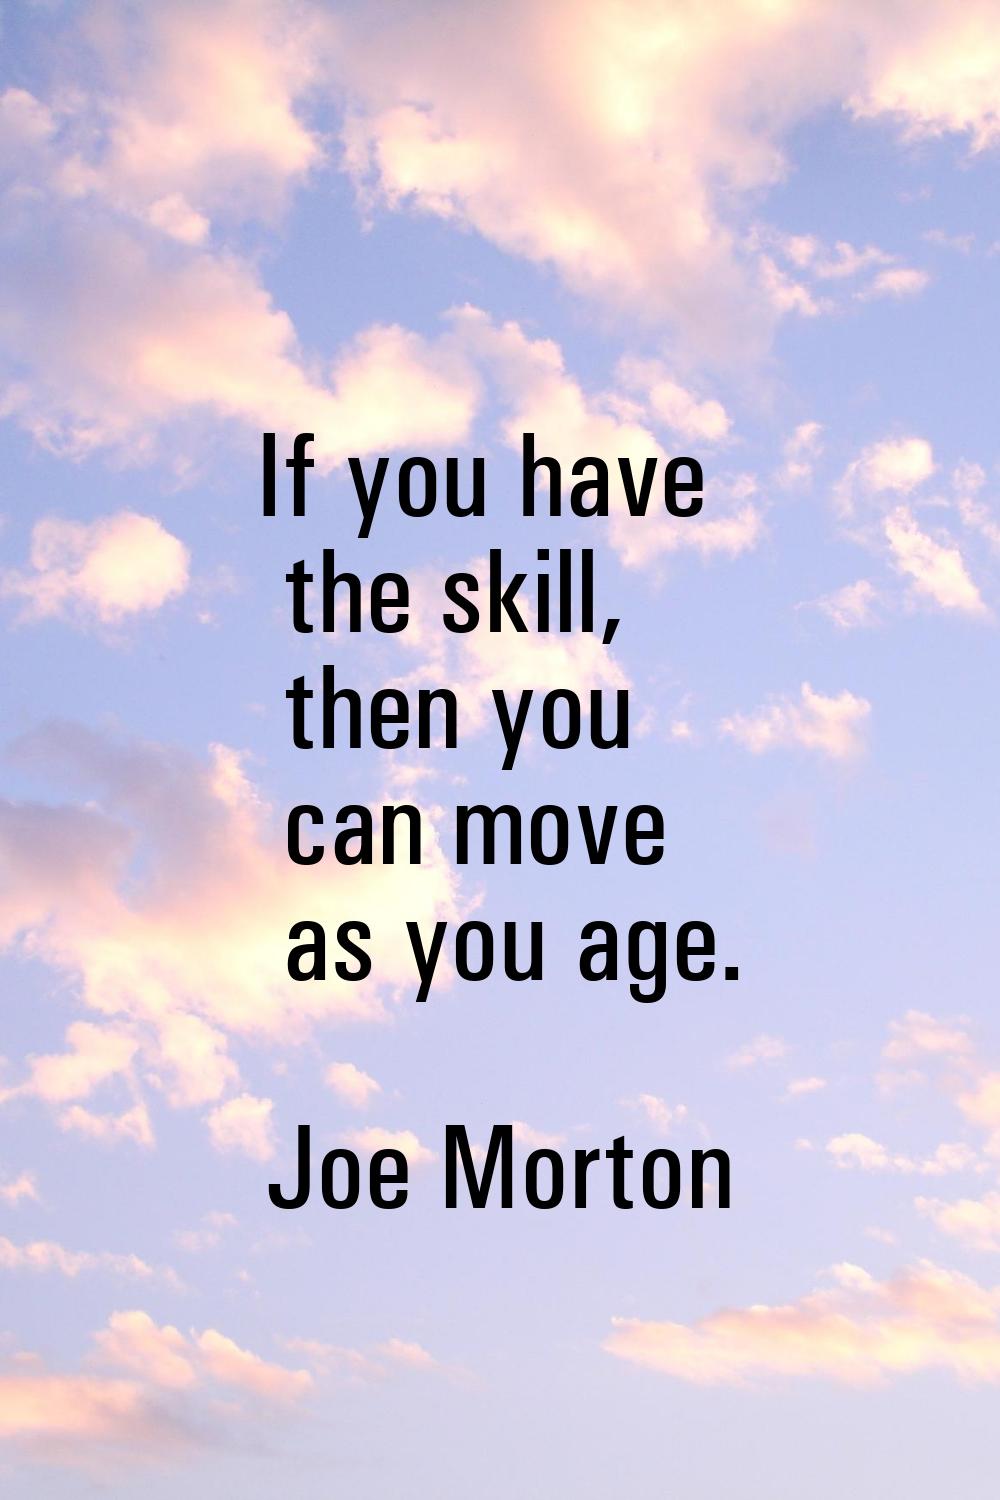 If you have the skill, then you can move as you age.